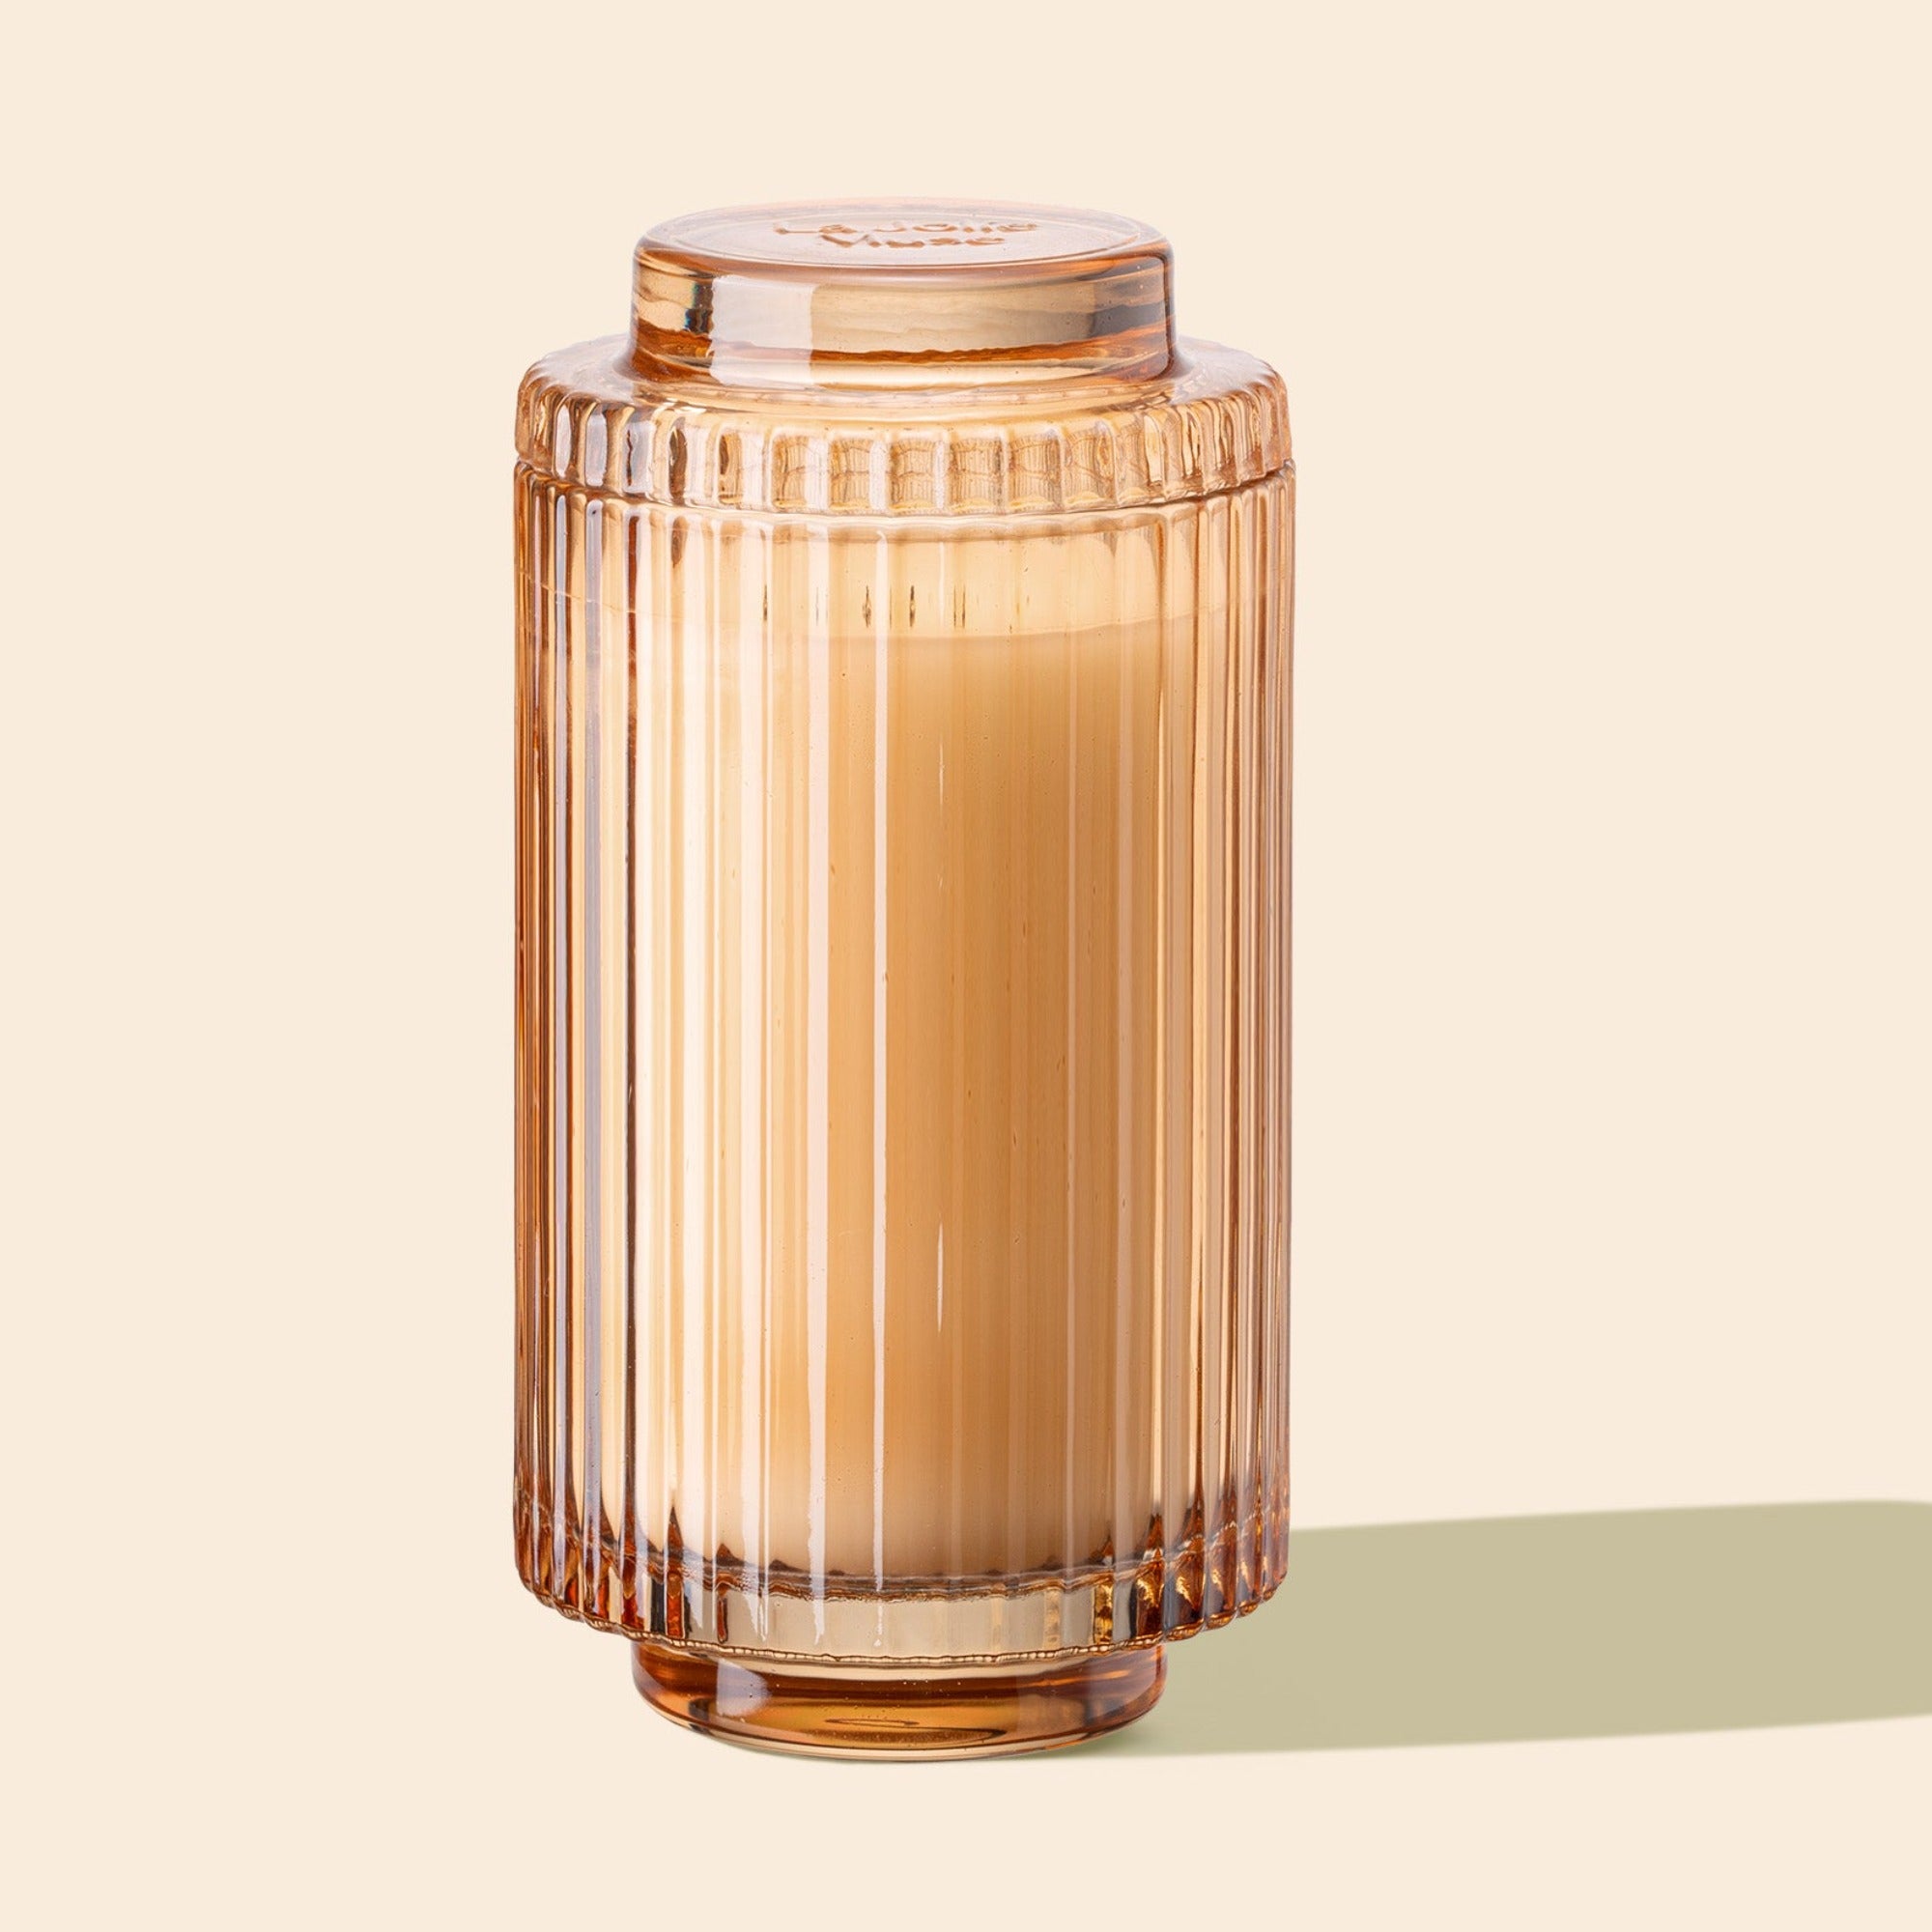 Product Shot of Amélie - Yuzu & Neroli Blossom 19oz candle in the middle